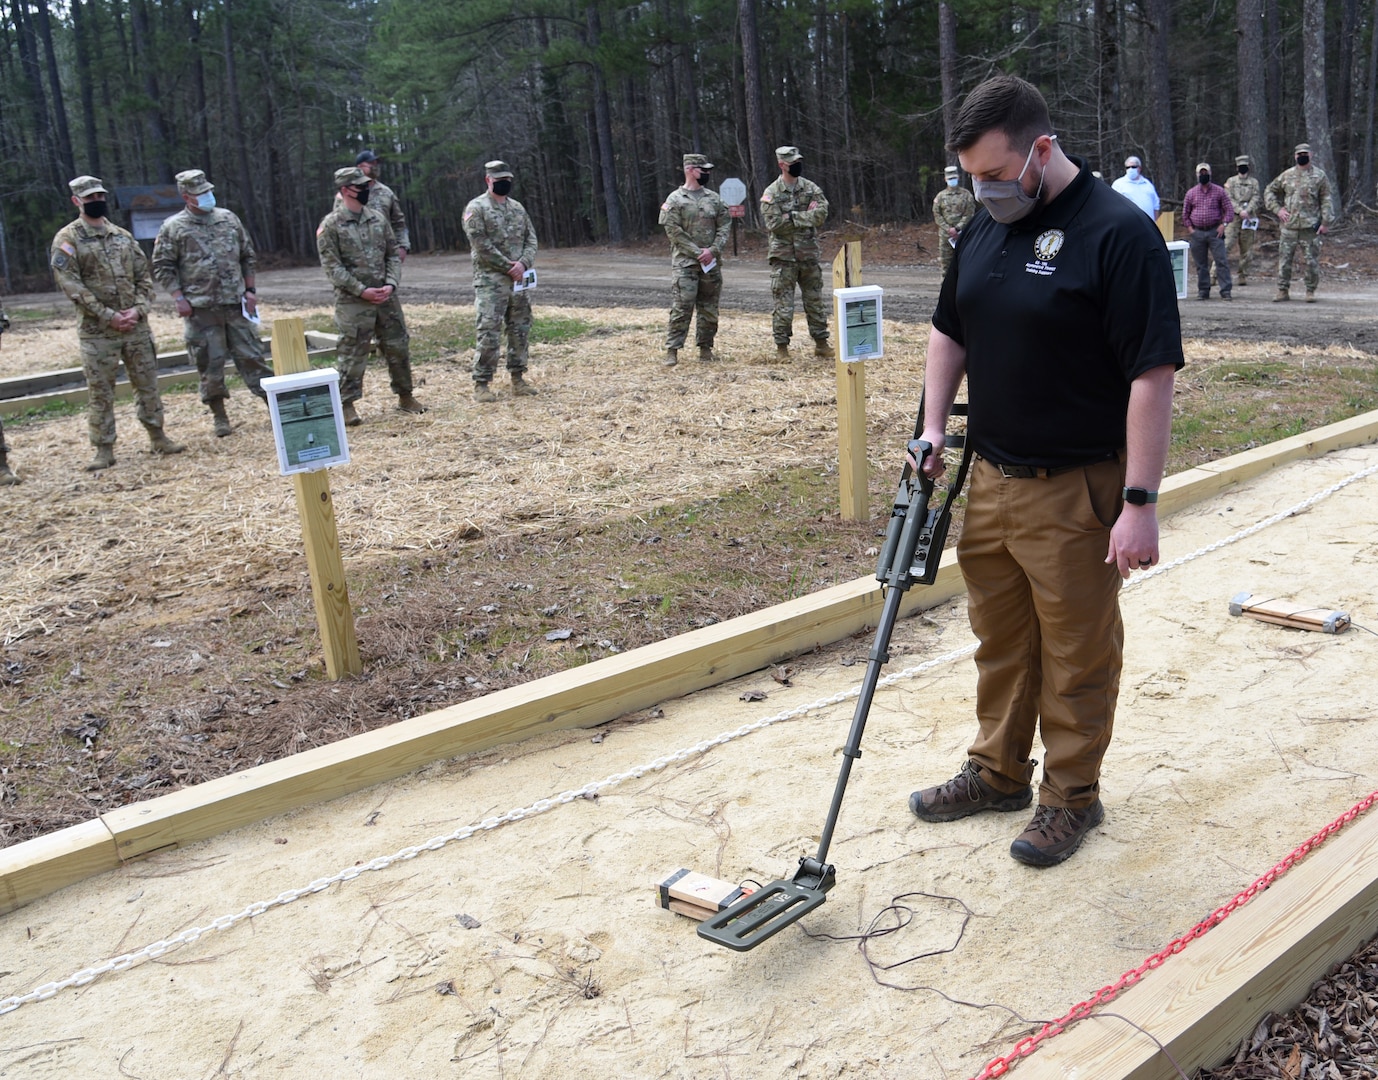 Current and former Virginia National Guard Soldiers and guests attend a dedication ceremony for the new Banks-Lambert Handheld Detection Lane March 26, 2021, at Fort Pickett, Virginia.